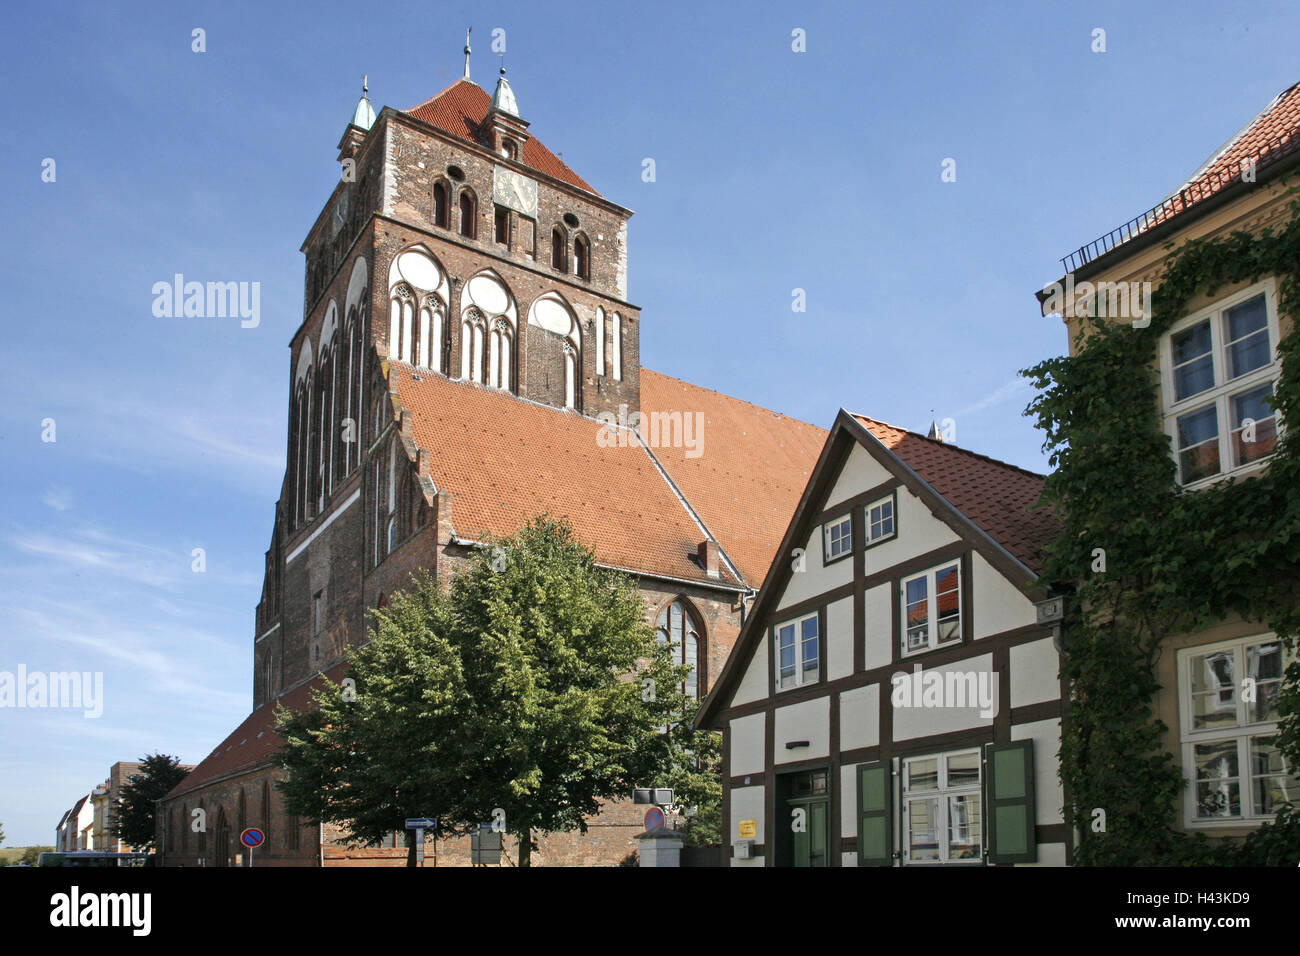 Germany, Mecklenburg-West Pomerania, Greifswald, Hanseatic town, St. Marien church, outside view, town, city centre, architecture, church, basilica, hall church, brick Gothic, North German, east gable, monumentally, tourism, outside, Stock Photo